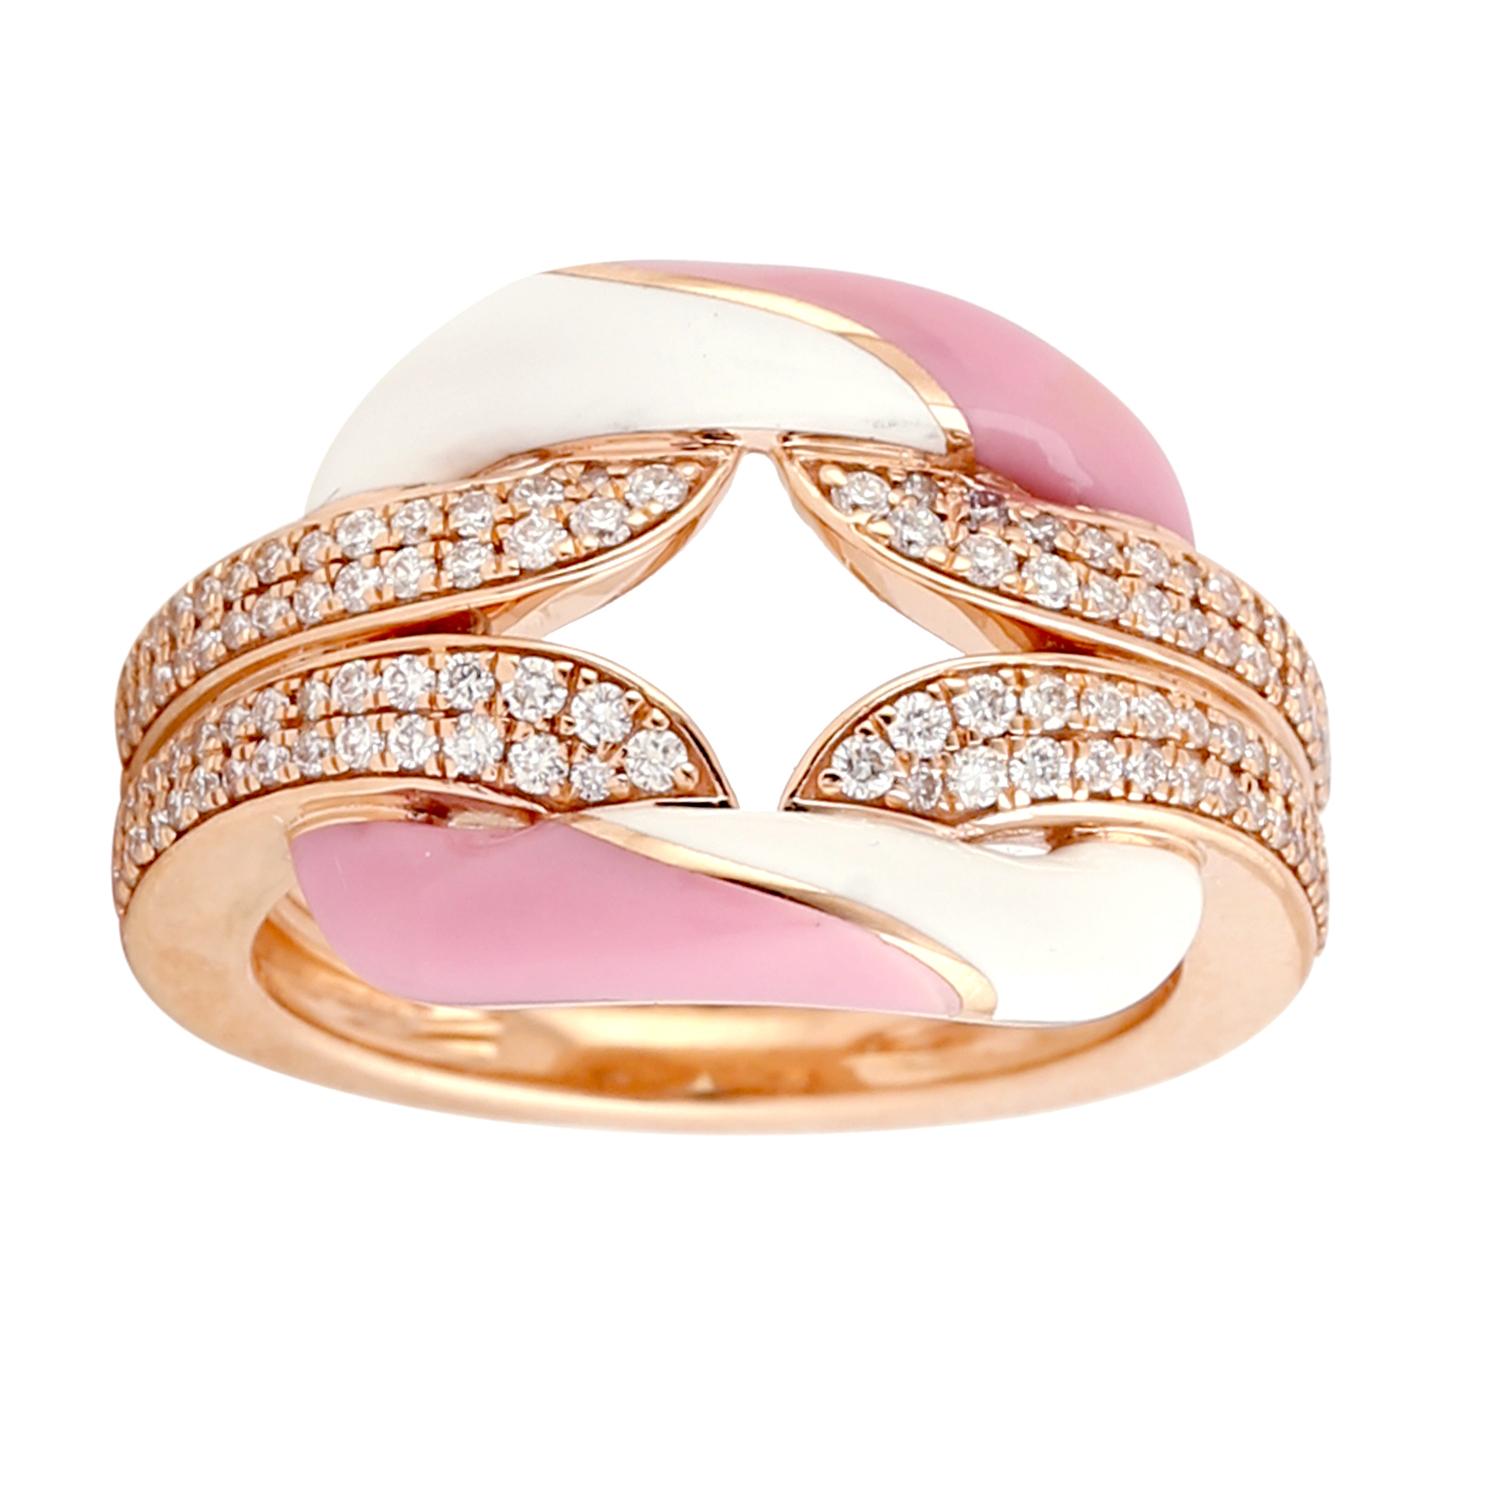 Women's Pink & White Ceramic Inlay Ring with Vs Diamonds Made in 18k Rose Gold For Sale